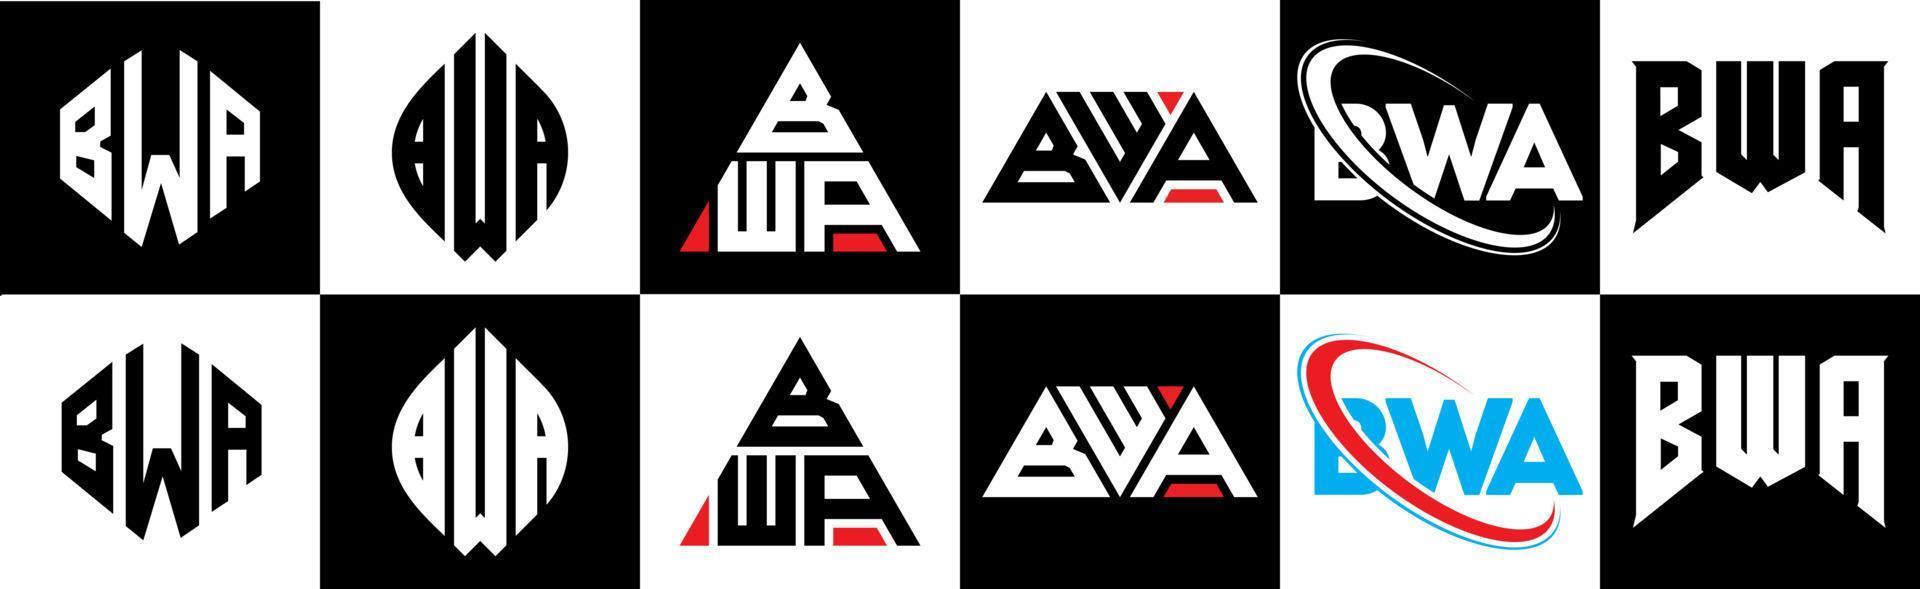 BWA letter logo design in six style. BWA polygon, circle, triangle, hexagon, flat and simple style with black and white color variation letter logo set in one artboard. BWA minimalist and classic logo vector